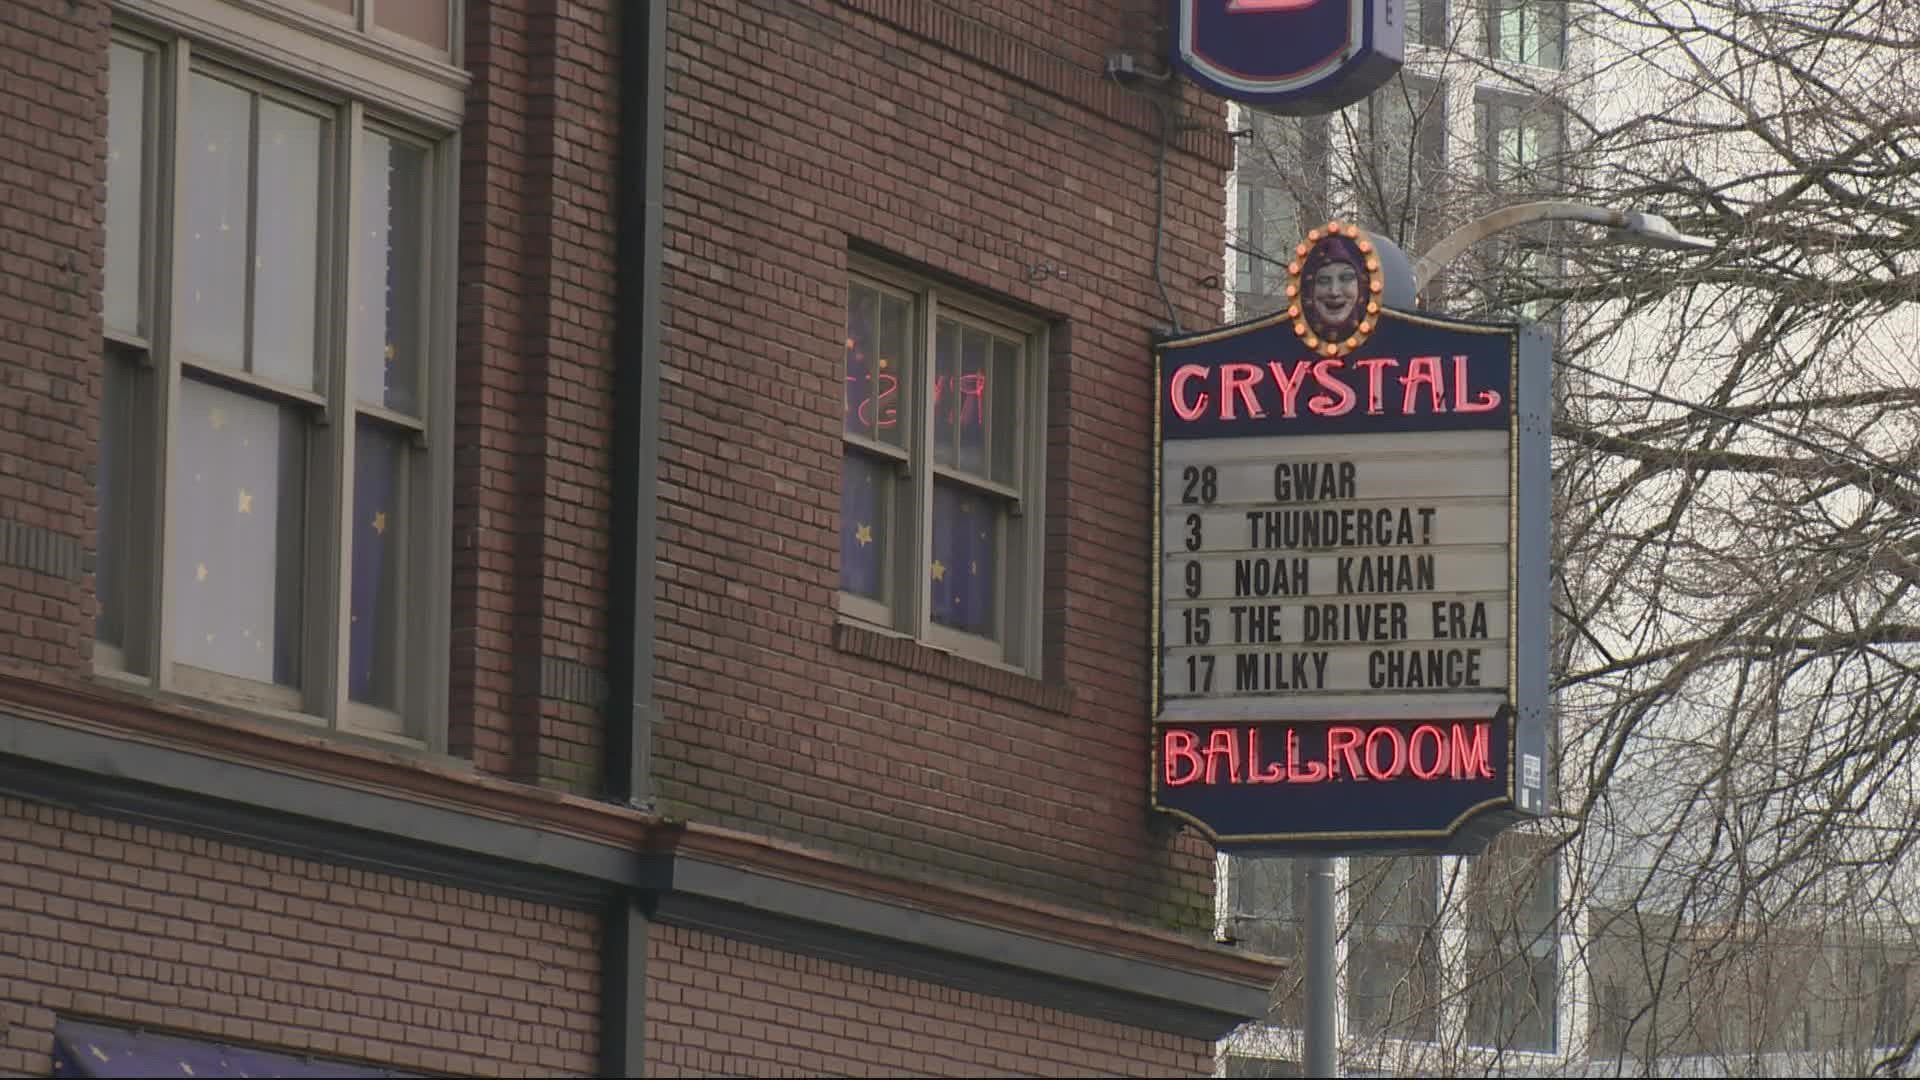 The Portland hotel and brewpub chain's computer system was breached over the weekend. KGW's Bryant Clerkley reports.